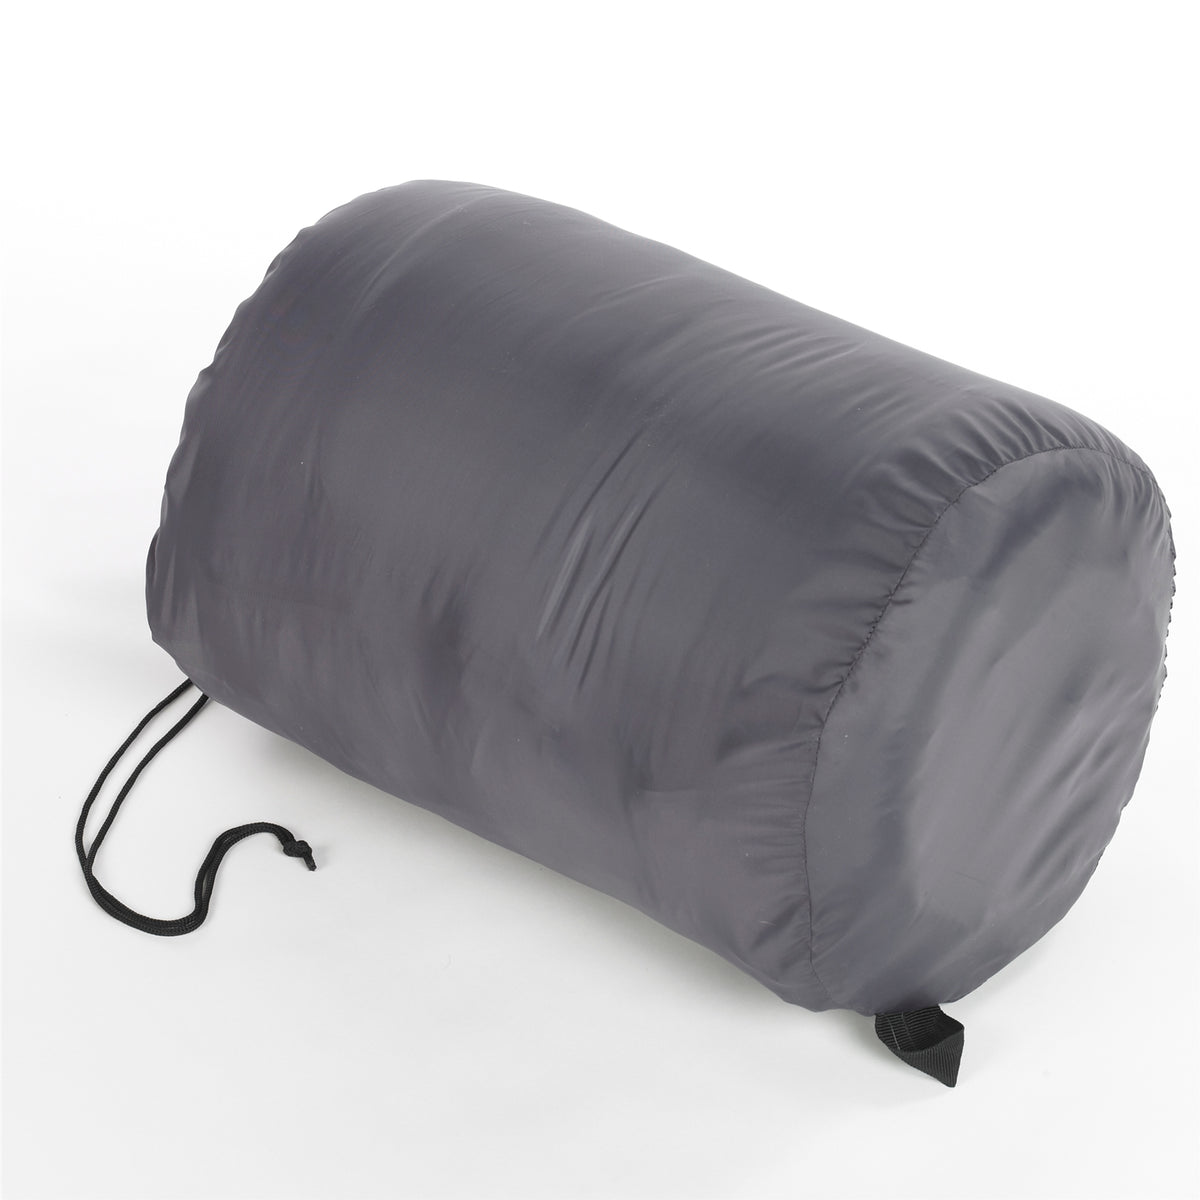 buy camp sleeping bags at cheap rate in bulk. wholesale & retail sporting supplies store.